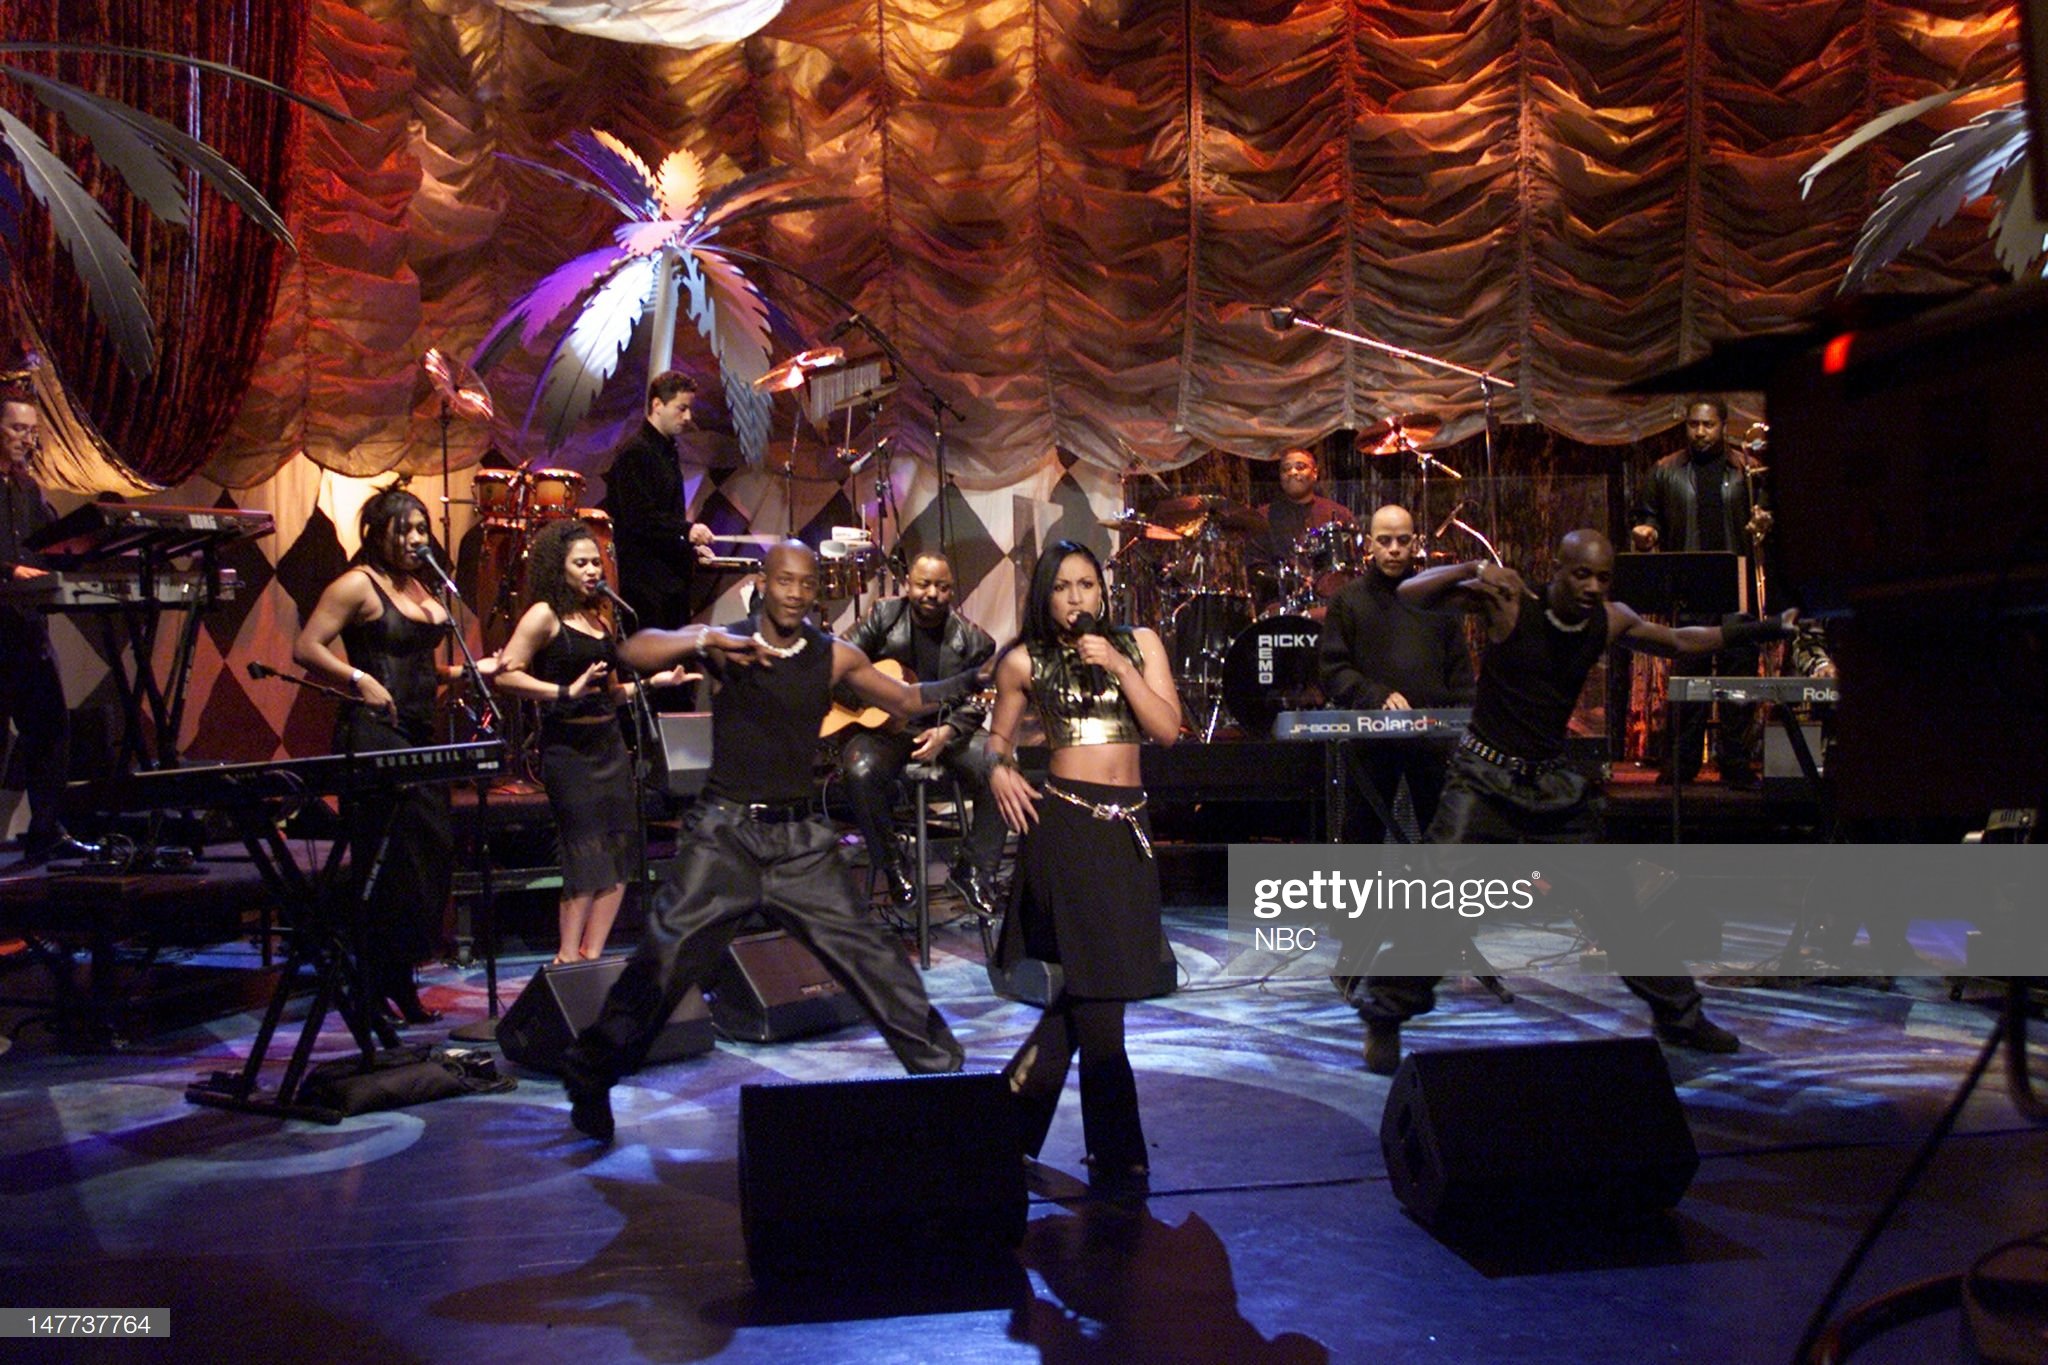  THE TONIGHT SHOW WITH JAY LENO -- Episode 1970 -- Pictured: Musical guest Debelah Morgan performs on January 3, 2002 -- (Photo by: Paul Drinkwater/NBC/NBCU Photo Bank via Getty Images) 